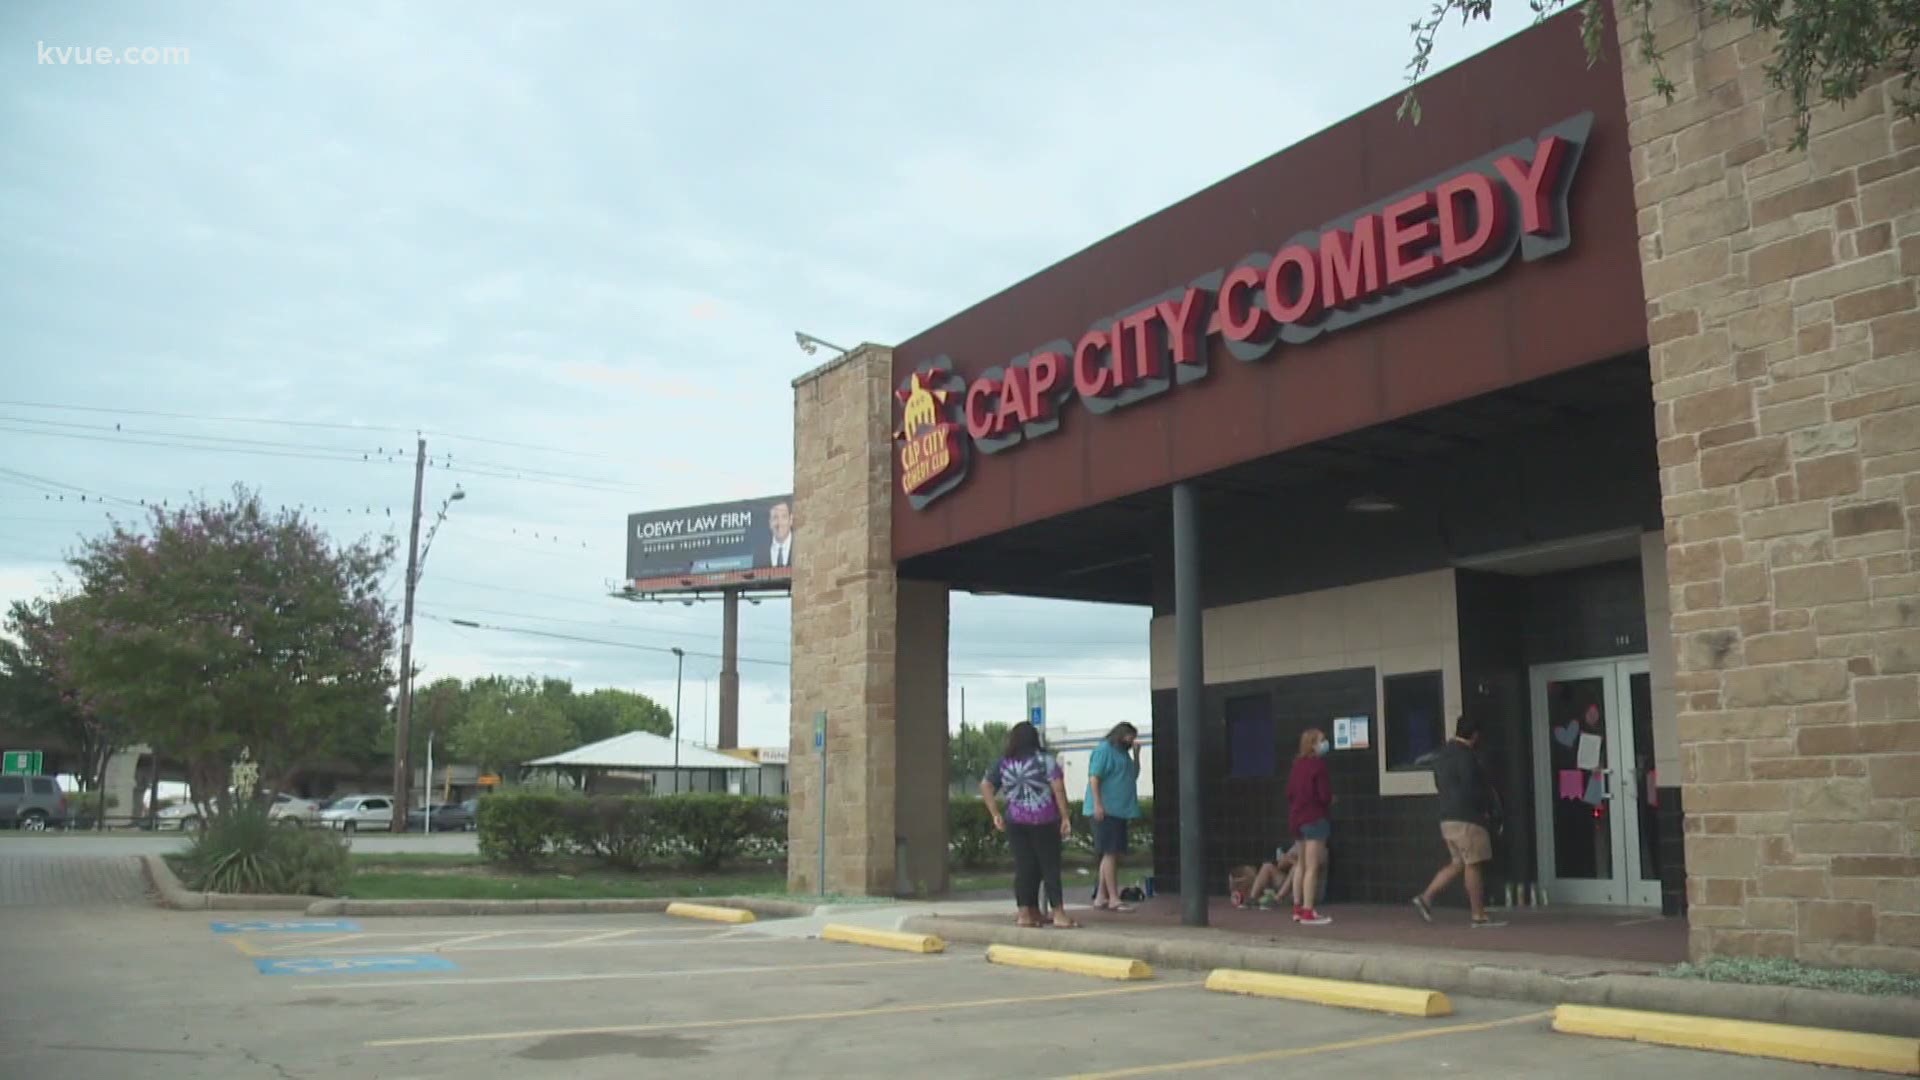 A place in Austin that's been serving up laughs for 35 years is shutting down.